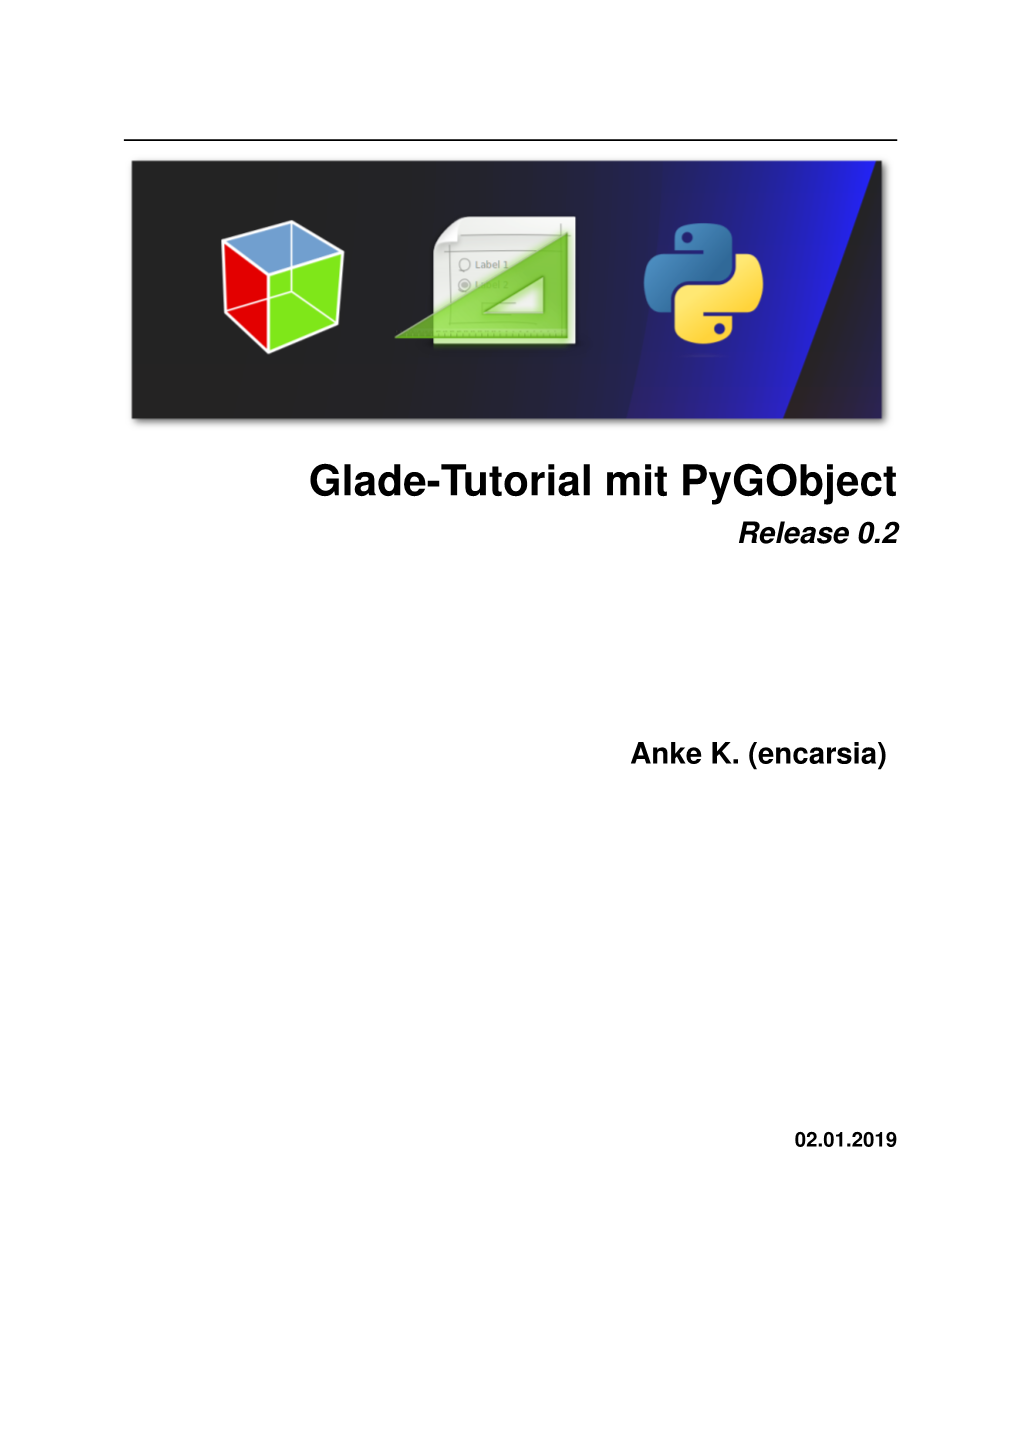 Glade-Tutorial Mit Pygobject Release 0.2